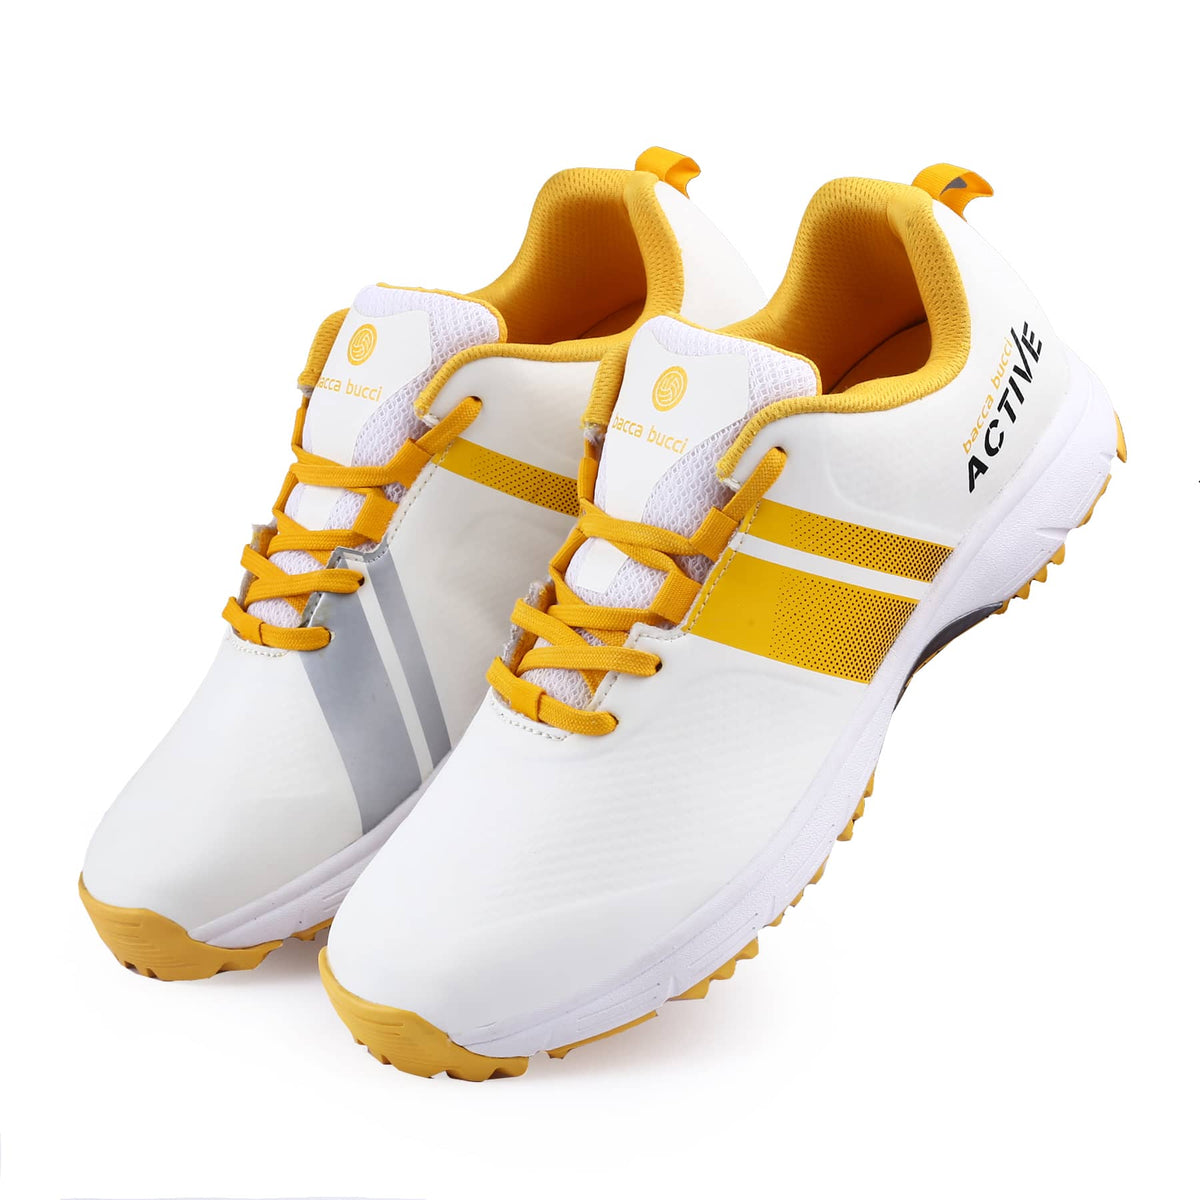 Bacca Bucci Century Runner Elite Performance Cricket Shoes – Dynamic Flex Tech, Superior Traction Grip, Breathable Agility Fit, High-Impact Shock Absorption, Professional Grade Sports Footwear for the Passionate Cricketer